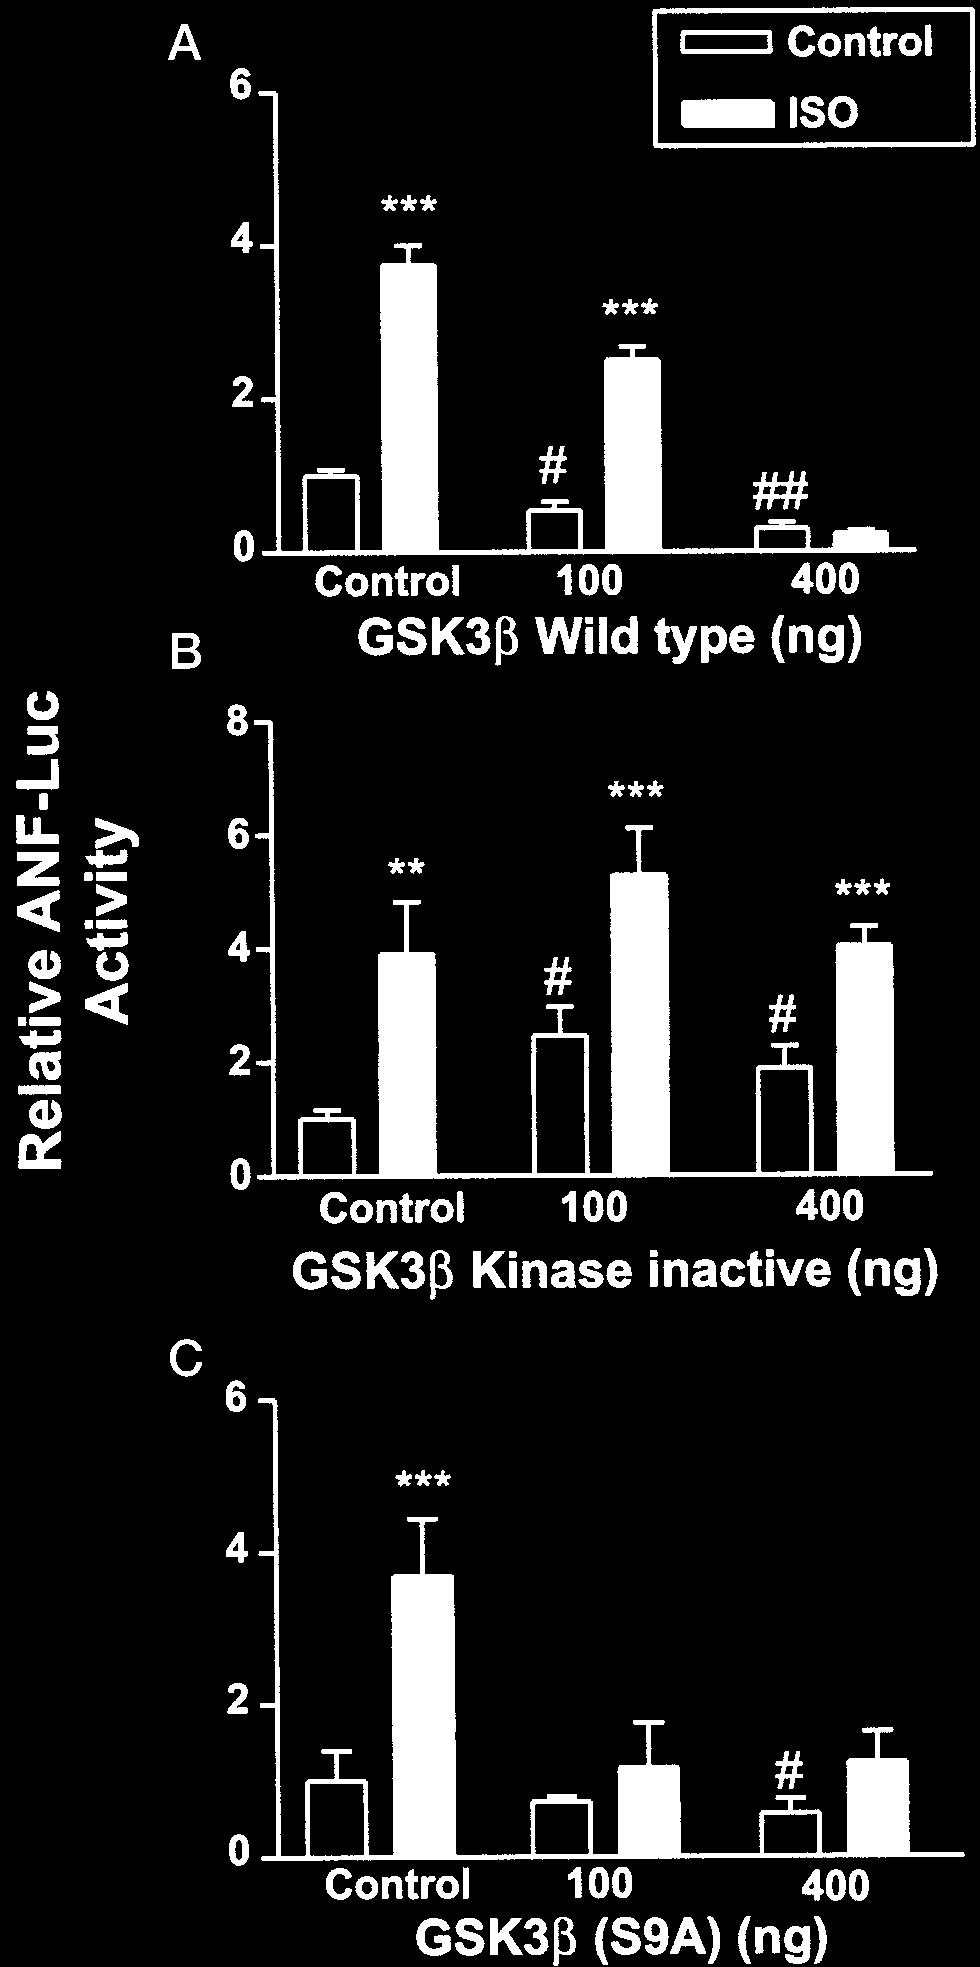 Phosphorylation of GSK3 was determined by the Western blot analysis using anti-phospho-ser-9 GSK3 antibody (bottom panel). Filters were stripped and reprobed with anti-gsk3 antibody (top panel).